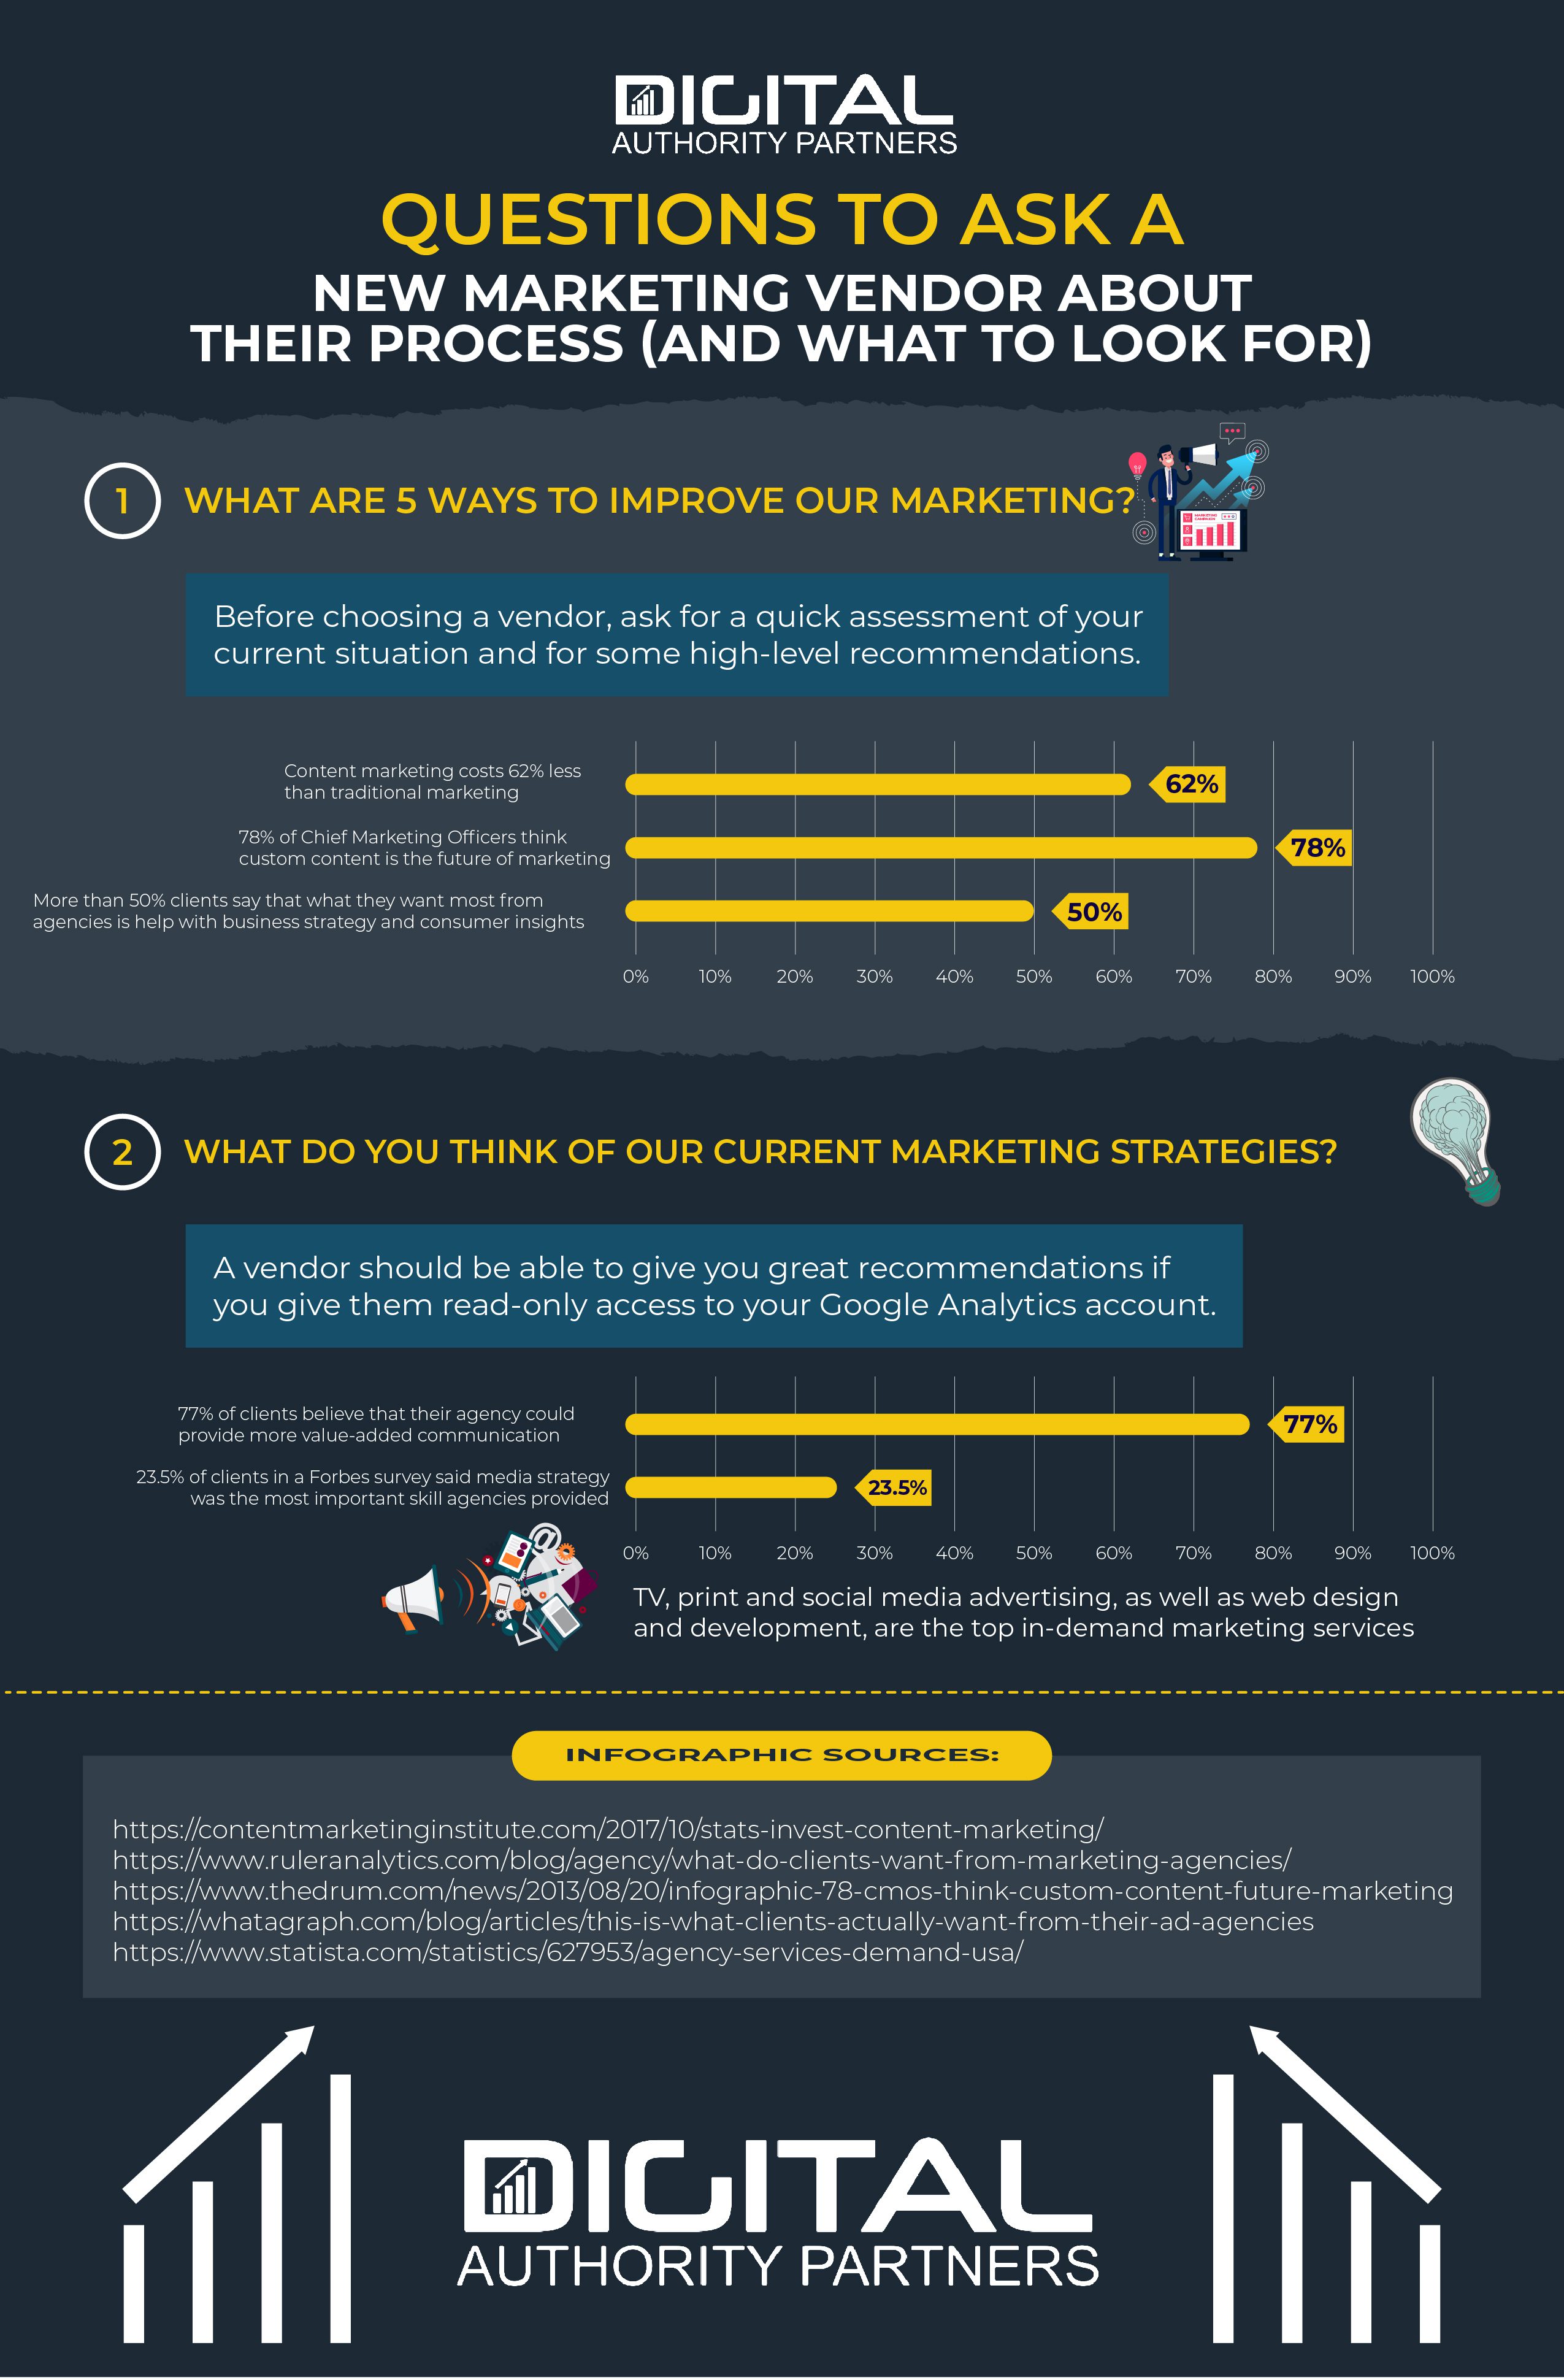 Infographic about the questions to ask a new marketing vendor about their process and what to look for